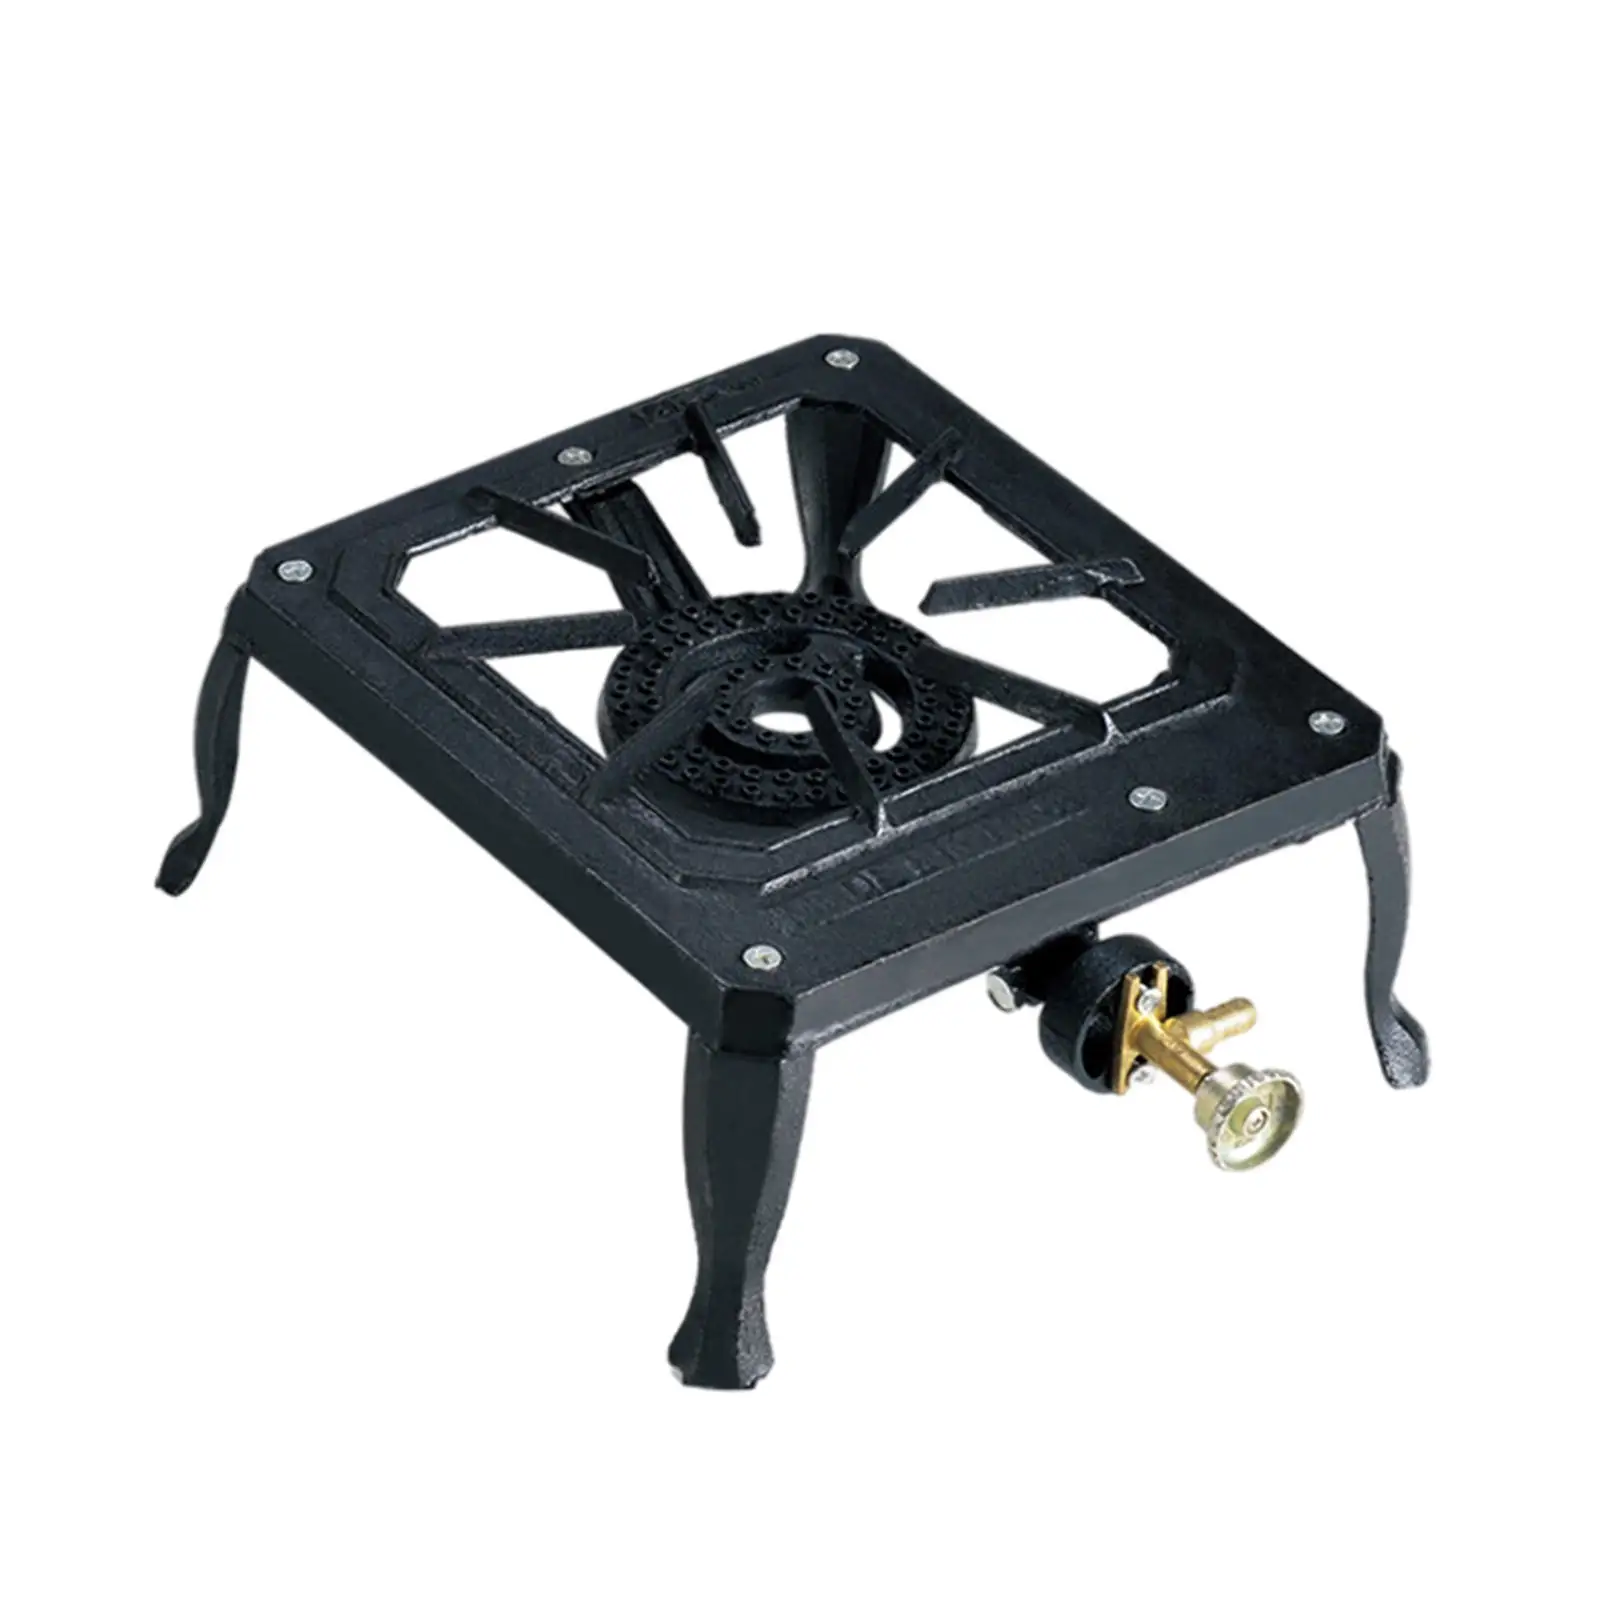 Gas Stove Single Burner Square Propane Stove Boiling Grill Cooker Burner for Home Outdoor